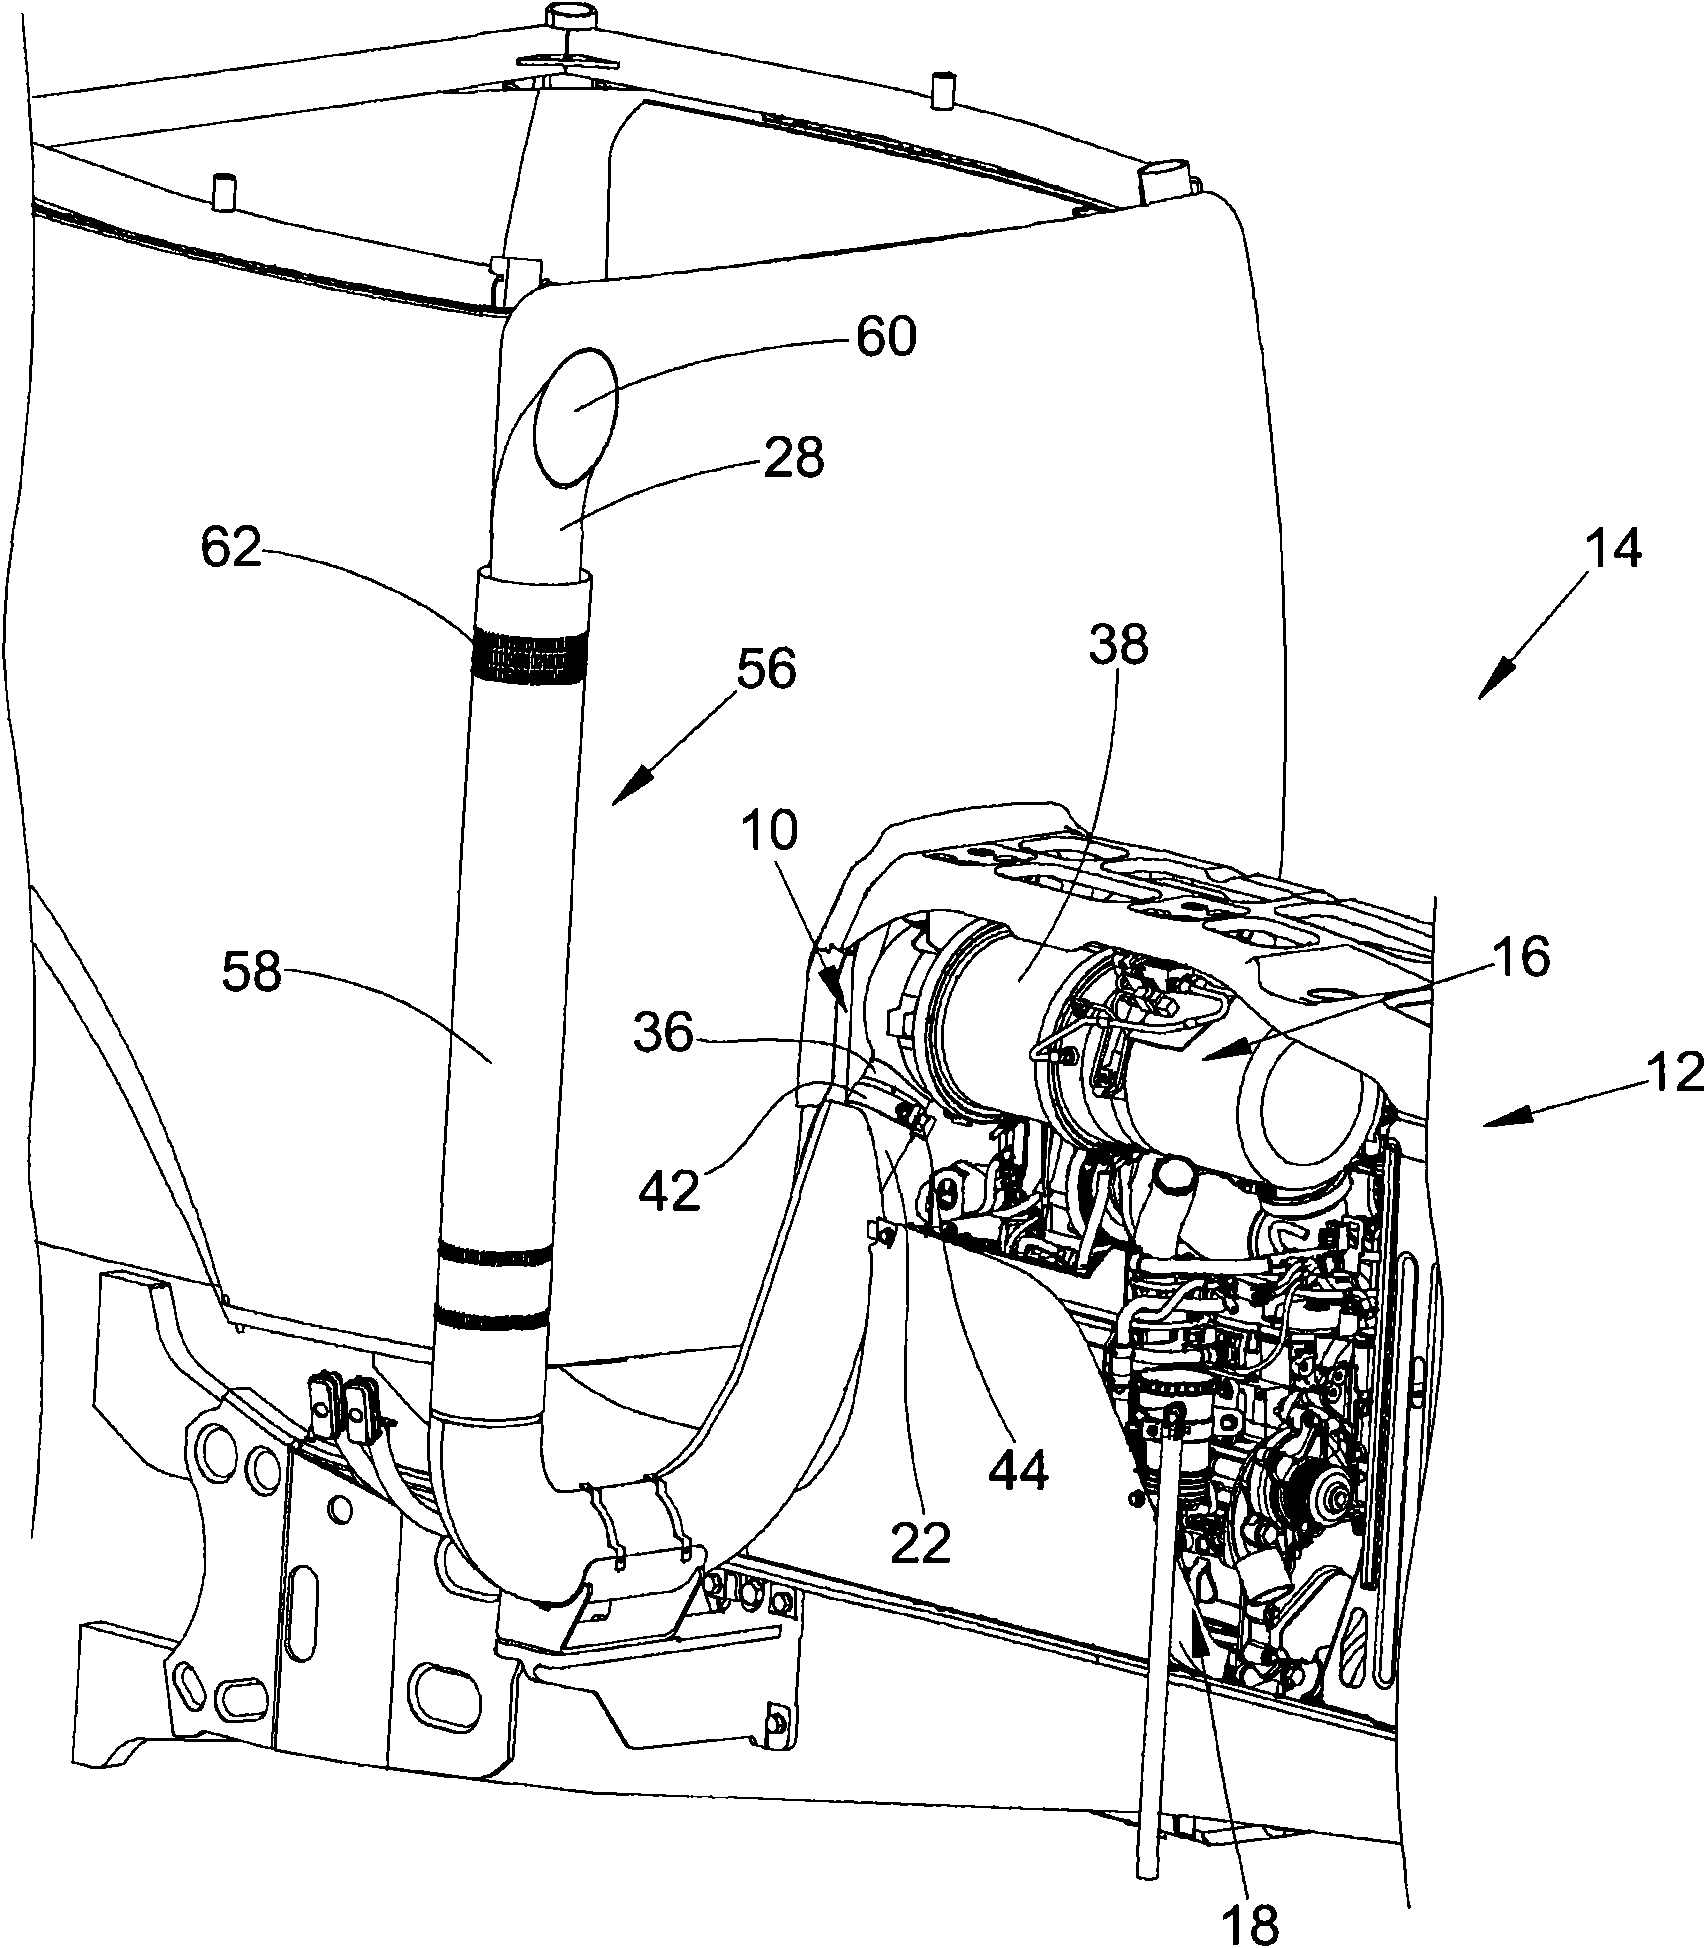 Device for cooling an exhaust gas flow emitting from a particulate filter